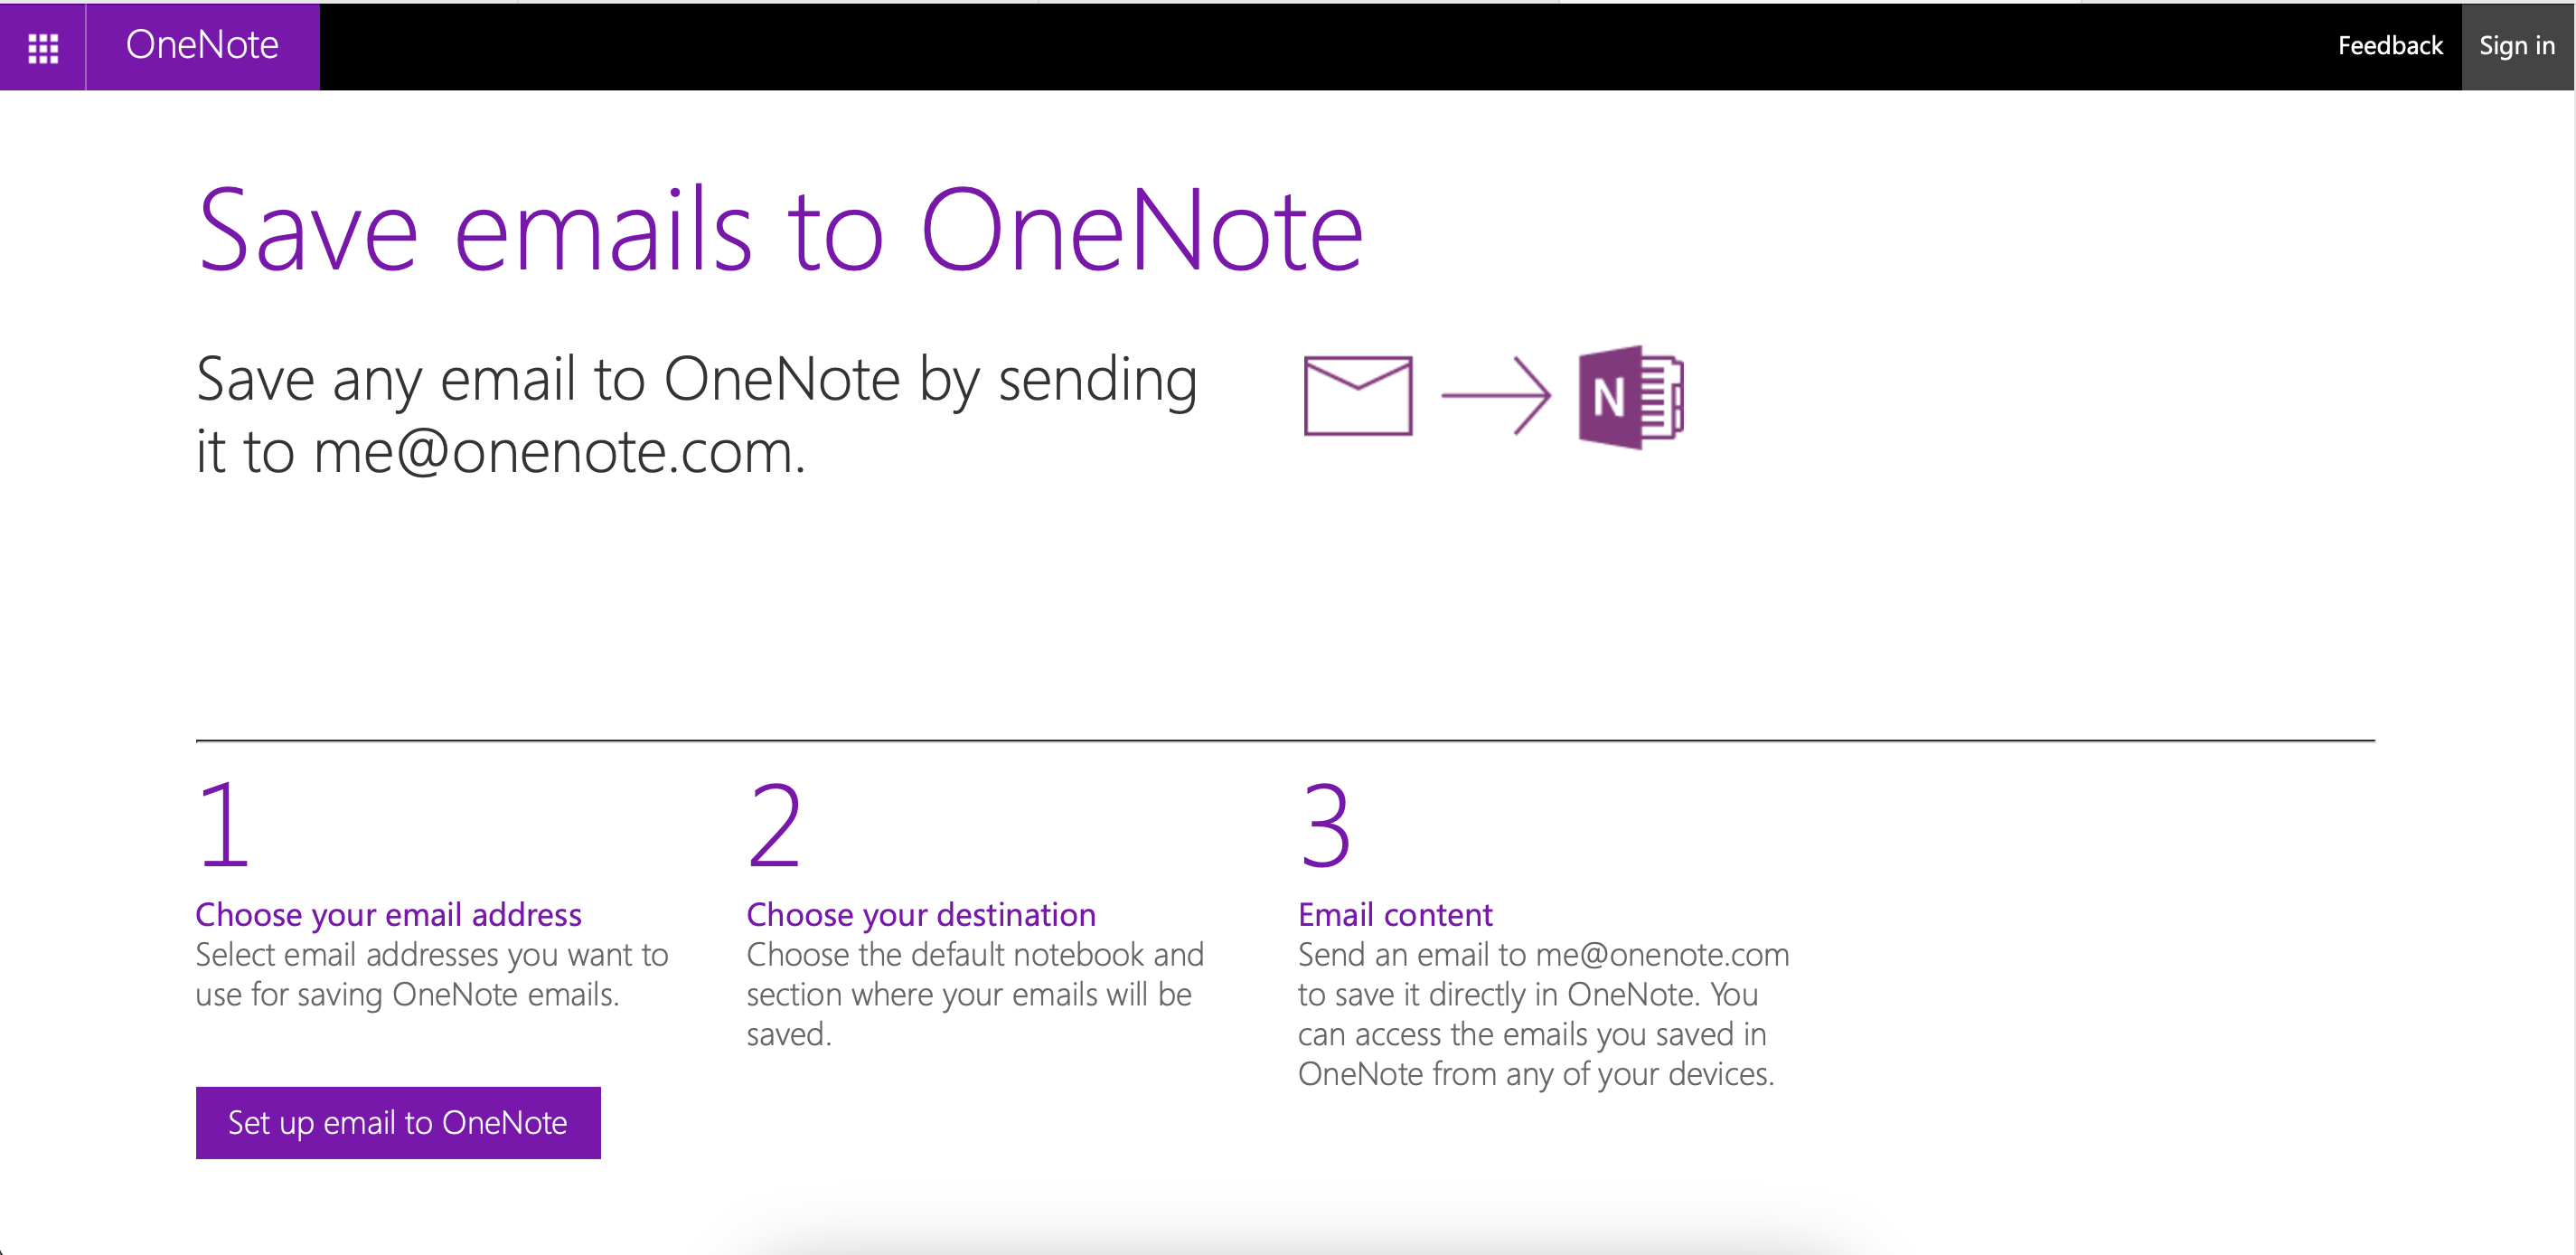 Set up your emails to send to OneNote